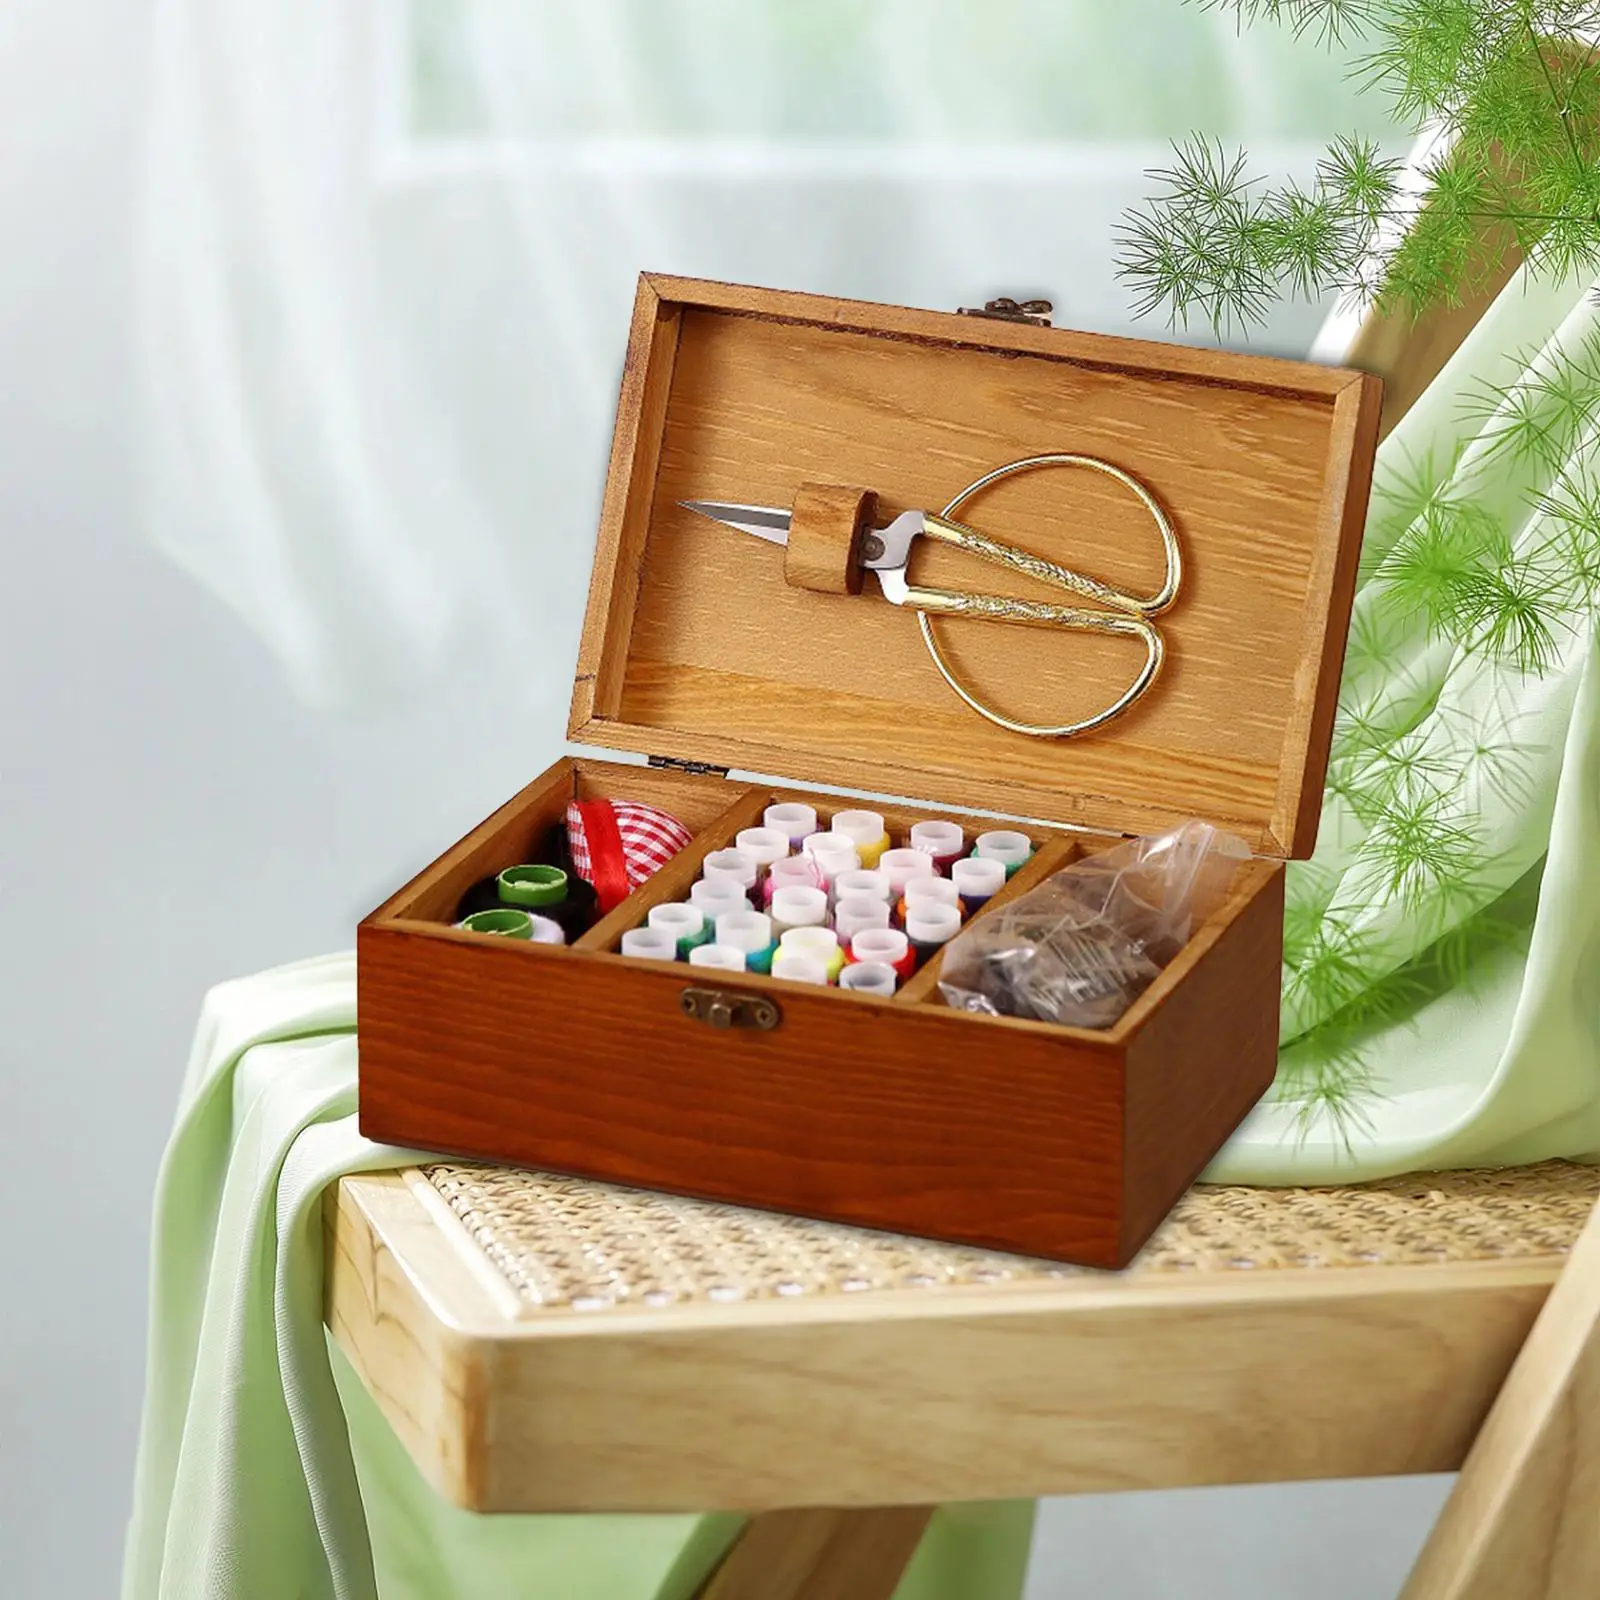 Wooden Sewing Box Empty Box Compact Embroidery Supplies Travel Multifunction Needlework Vintage Beginner Sewing Storage Basket